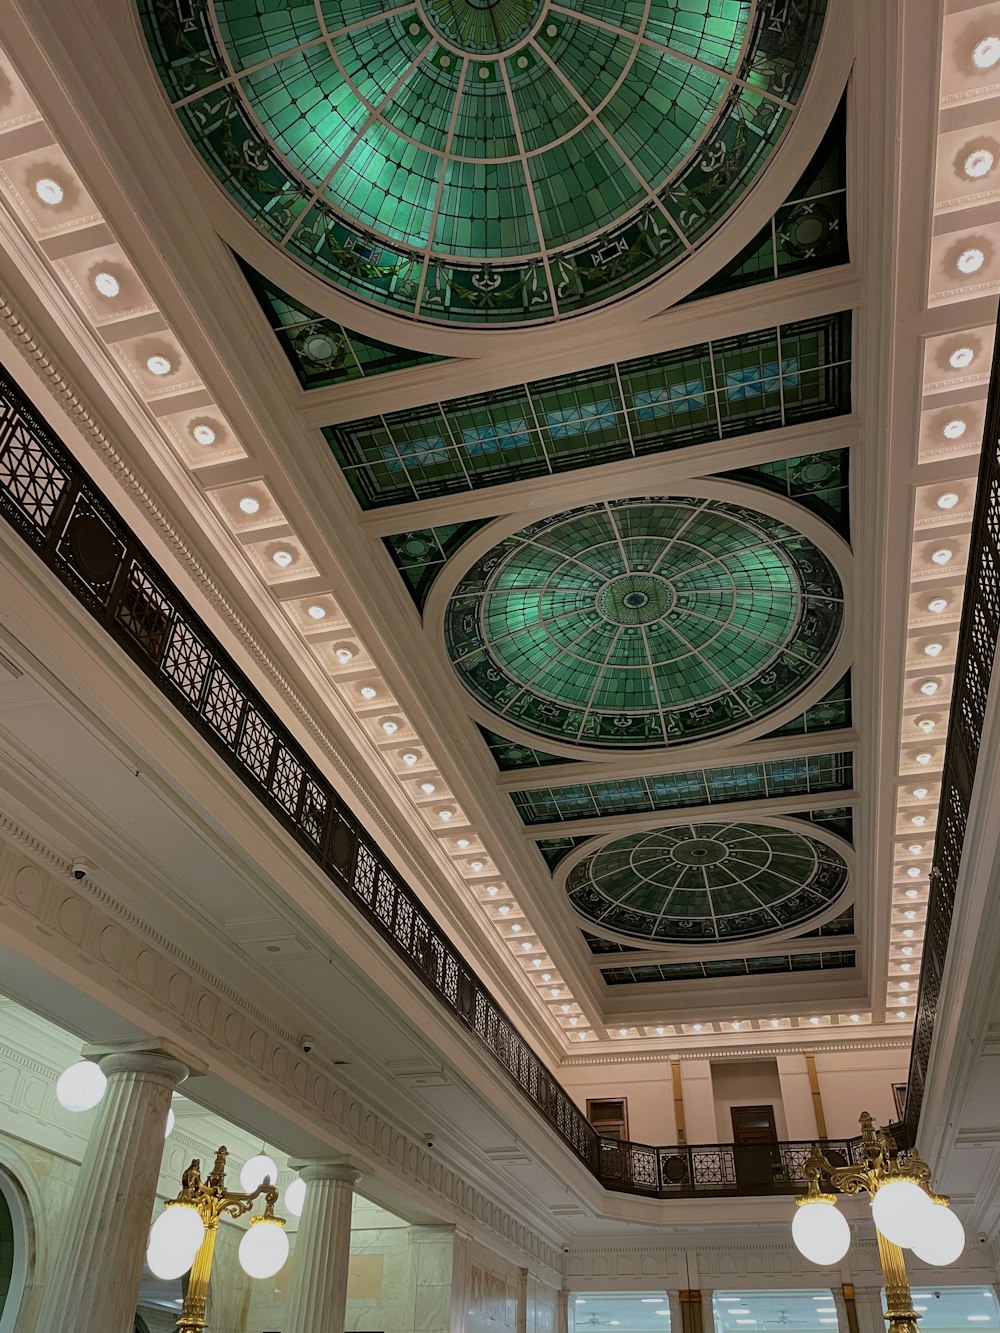 the ceiling of a large building with a green glass dome